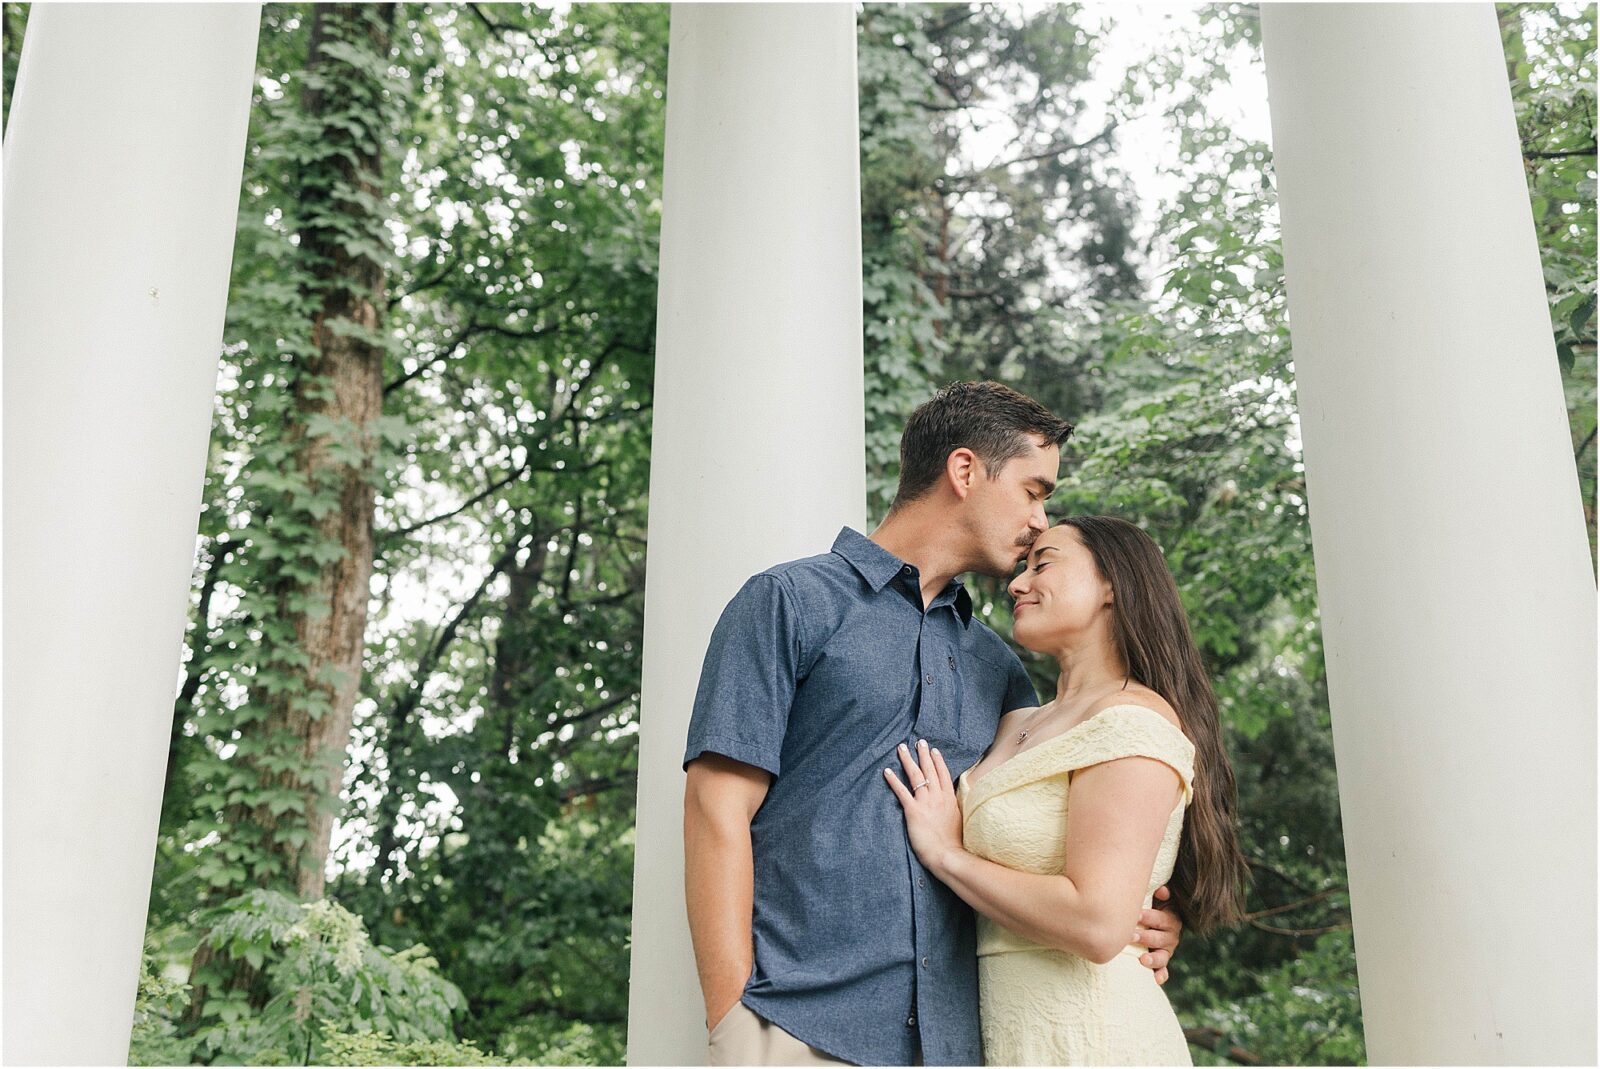 Romantic rainy engagement session at the philbrook